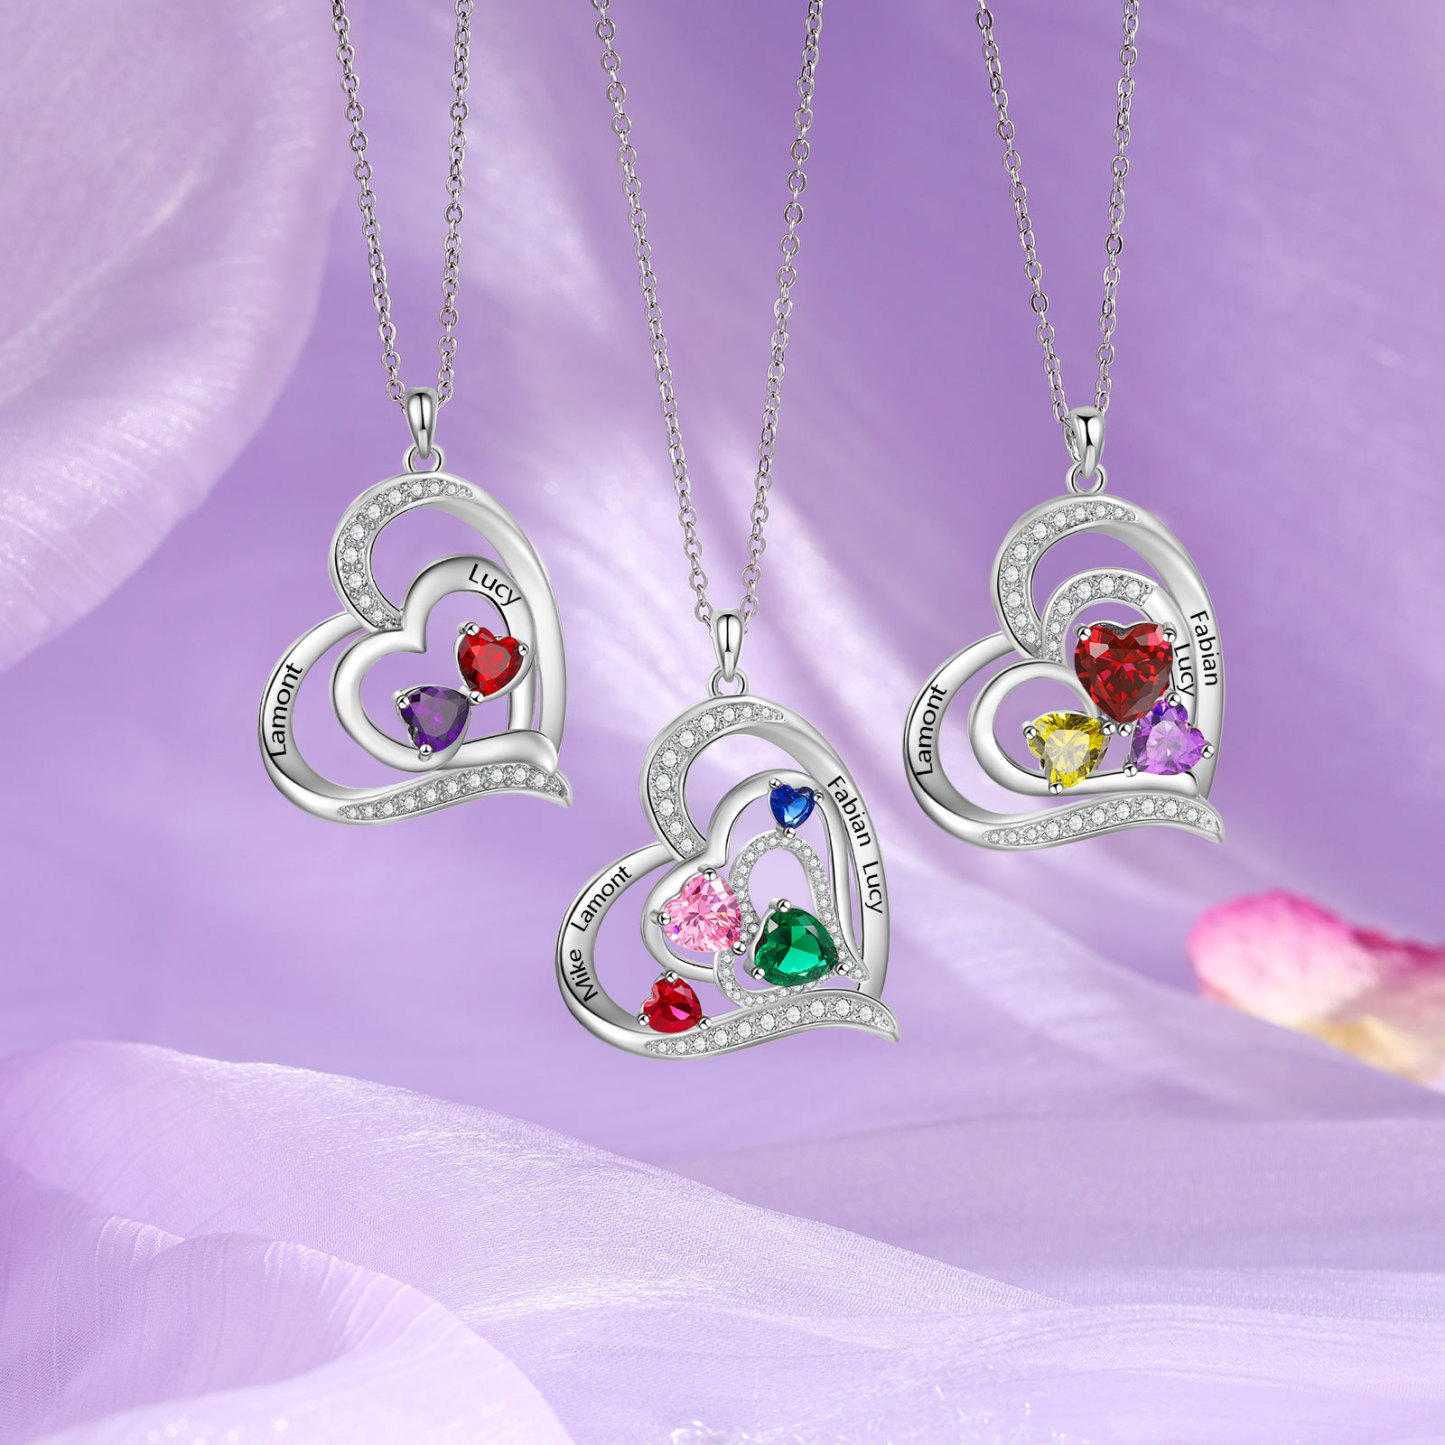 3 Names - Personalized Heart Necklace with Customized Names and Birthstone As Mother's Day Gift for Mom